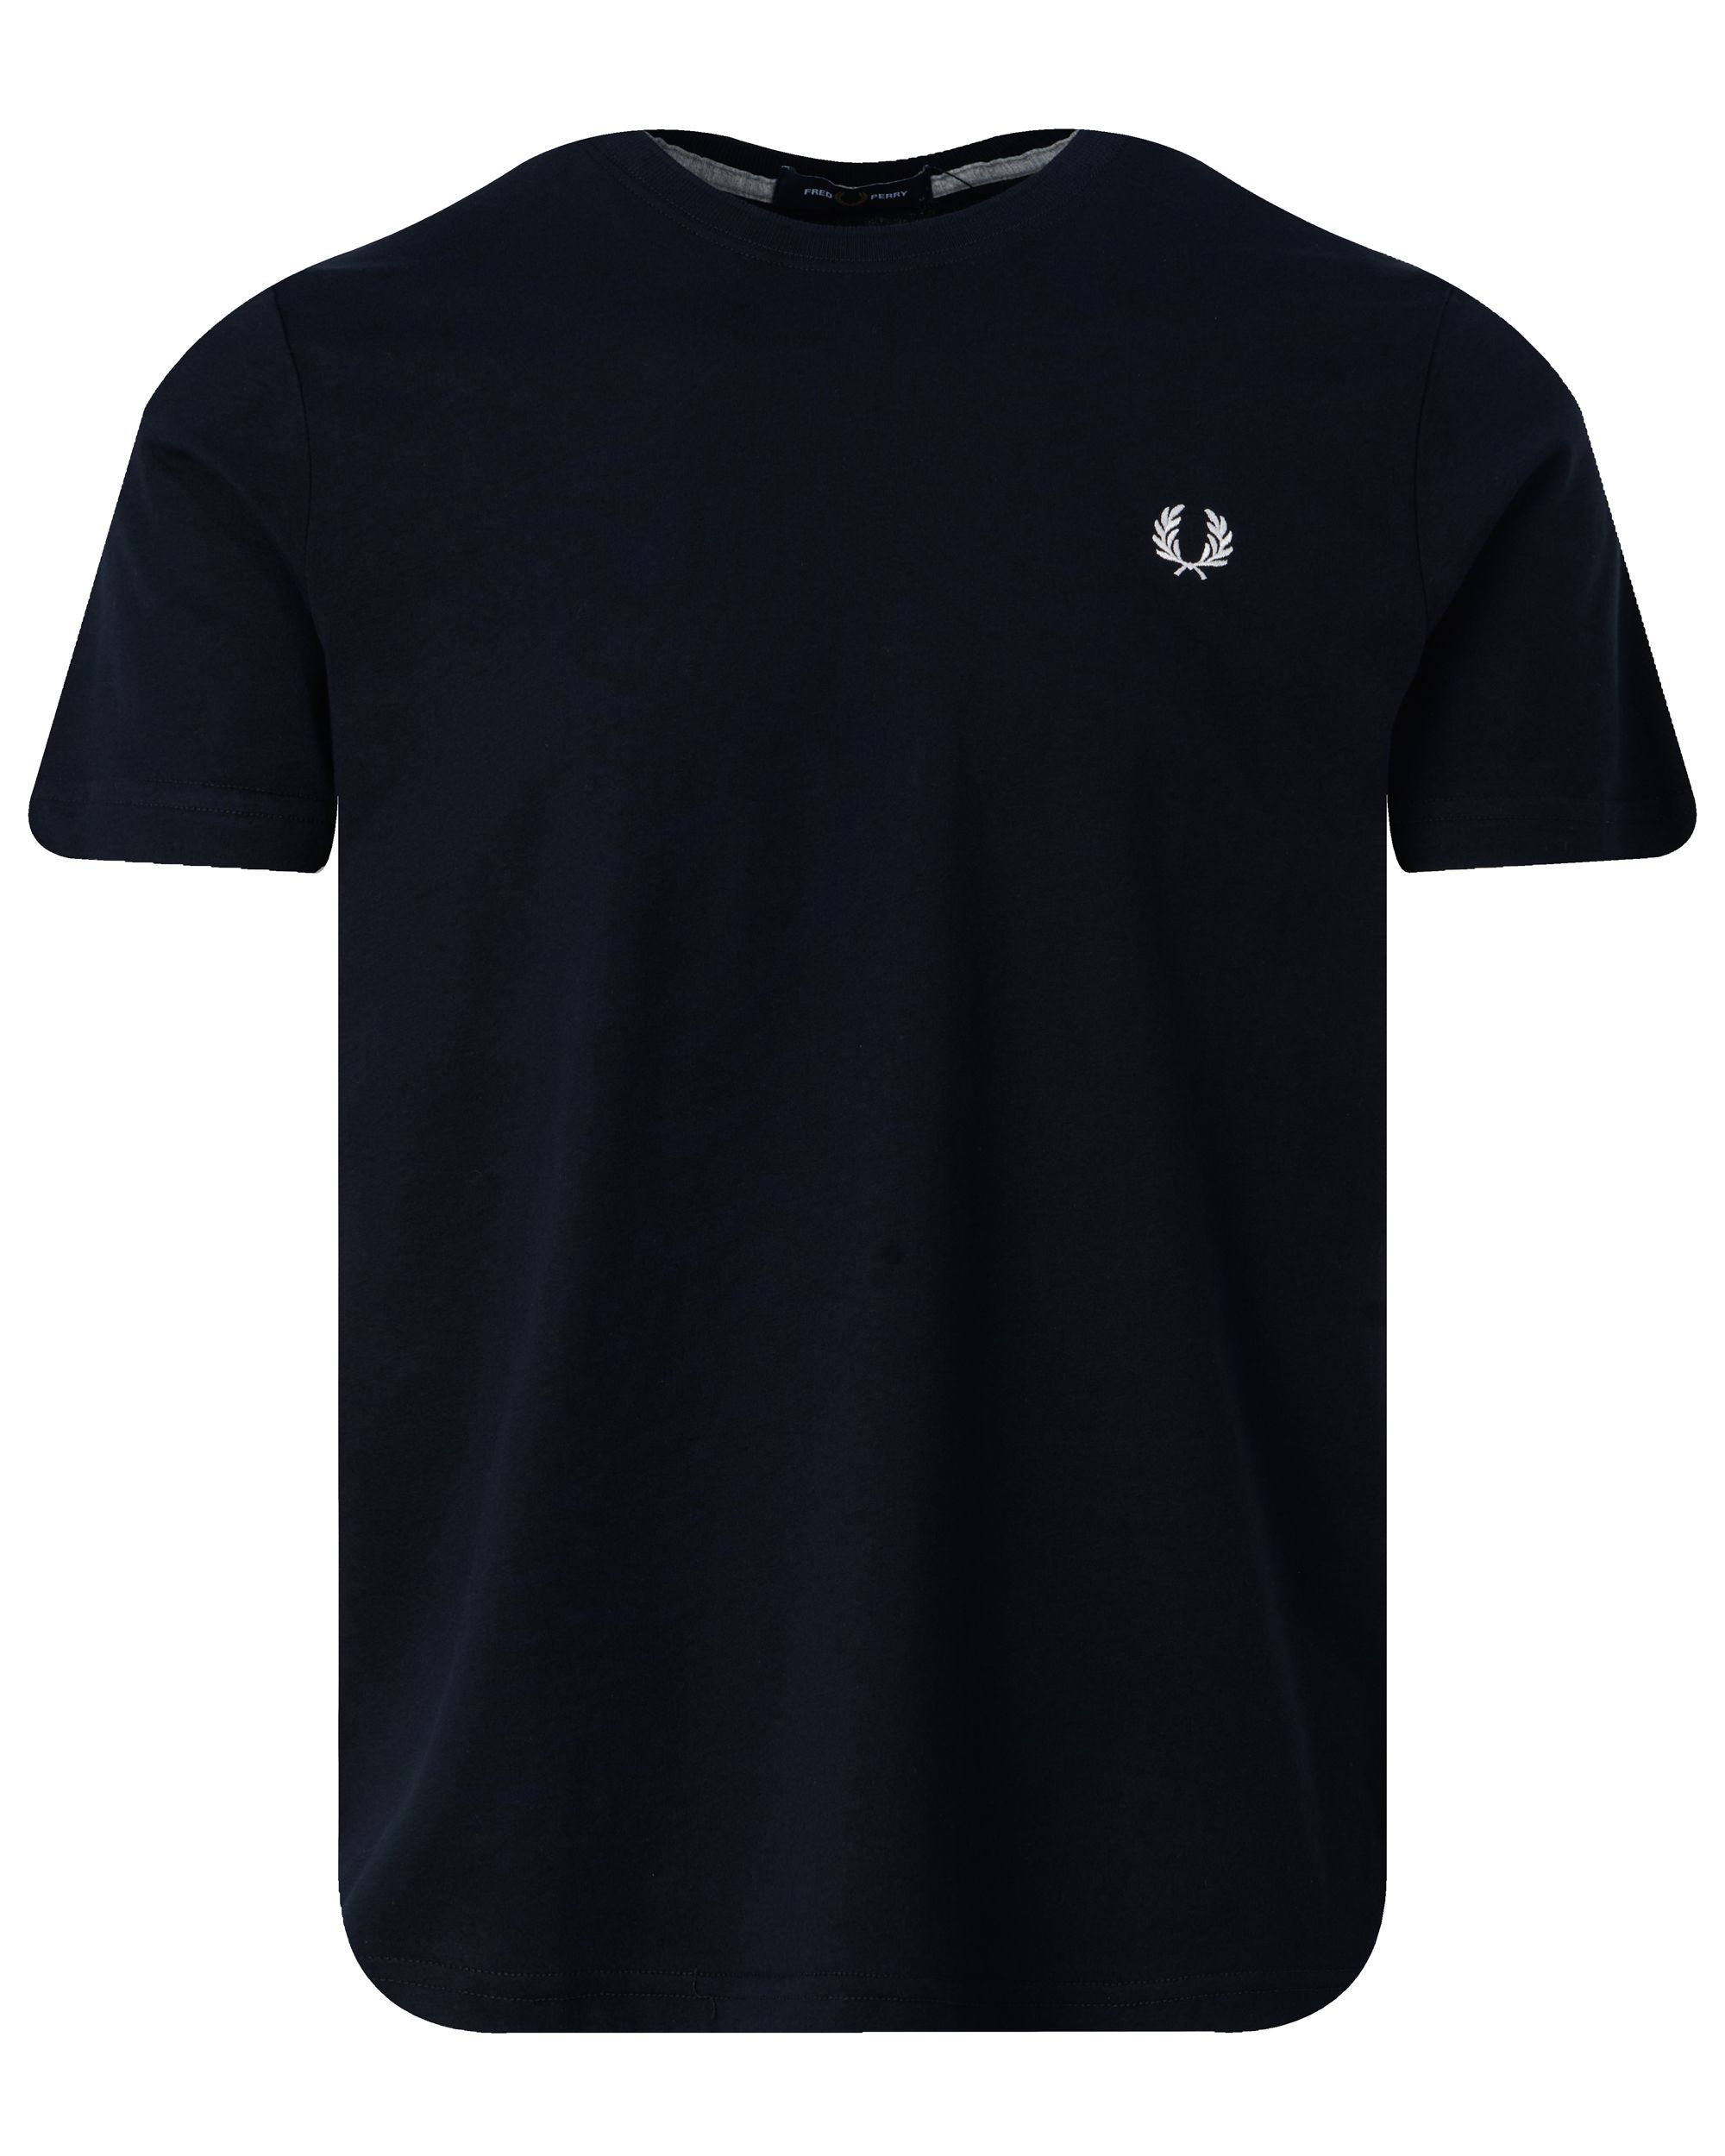 Fred Perry T-shirt KM Donker blauw 095664-001-L